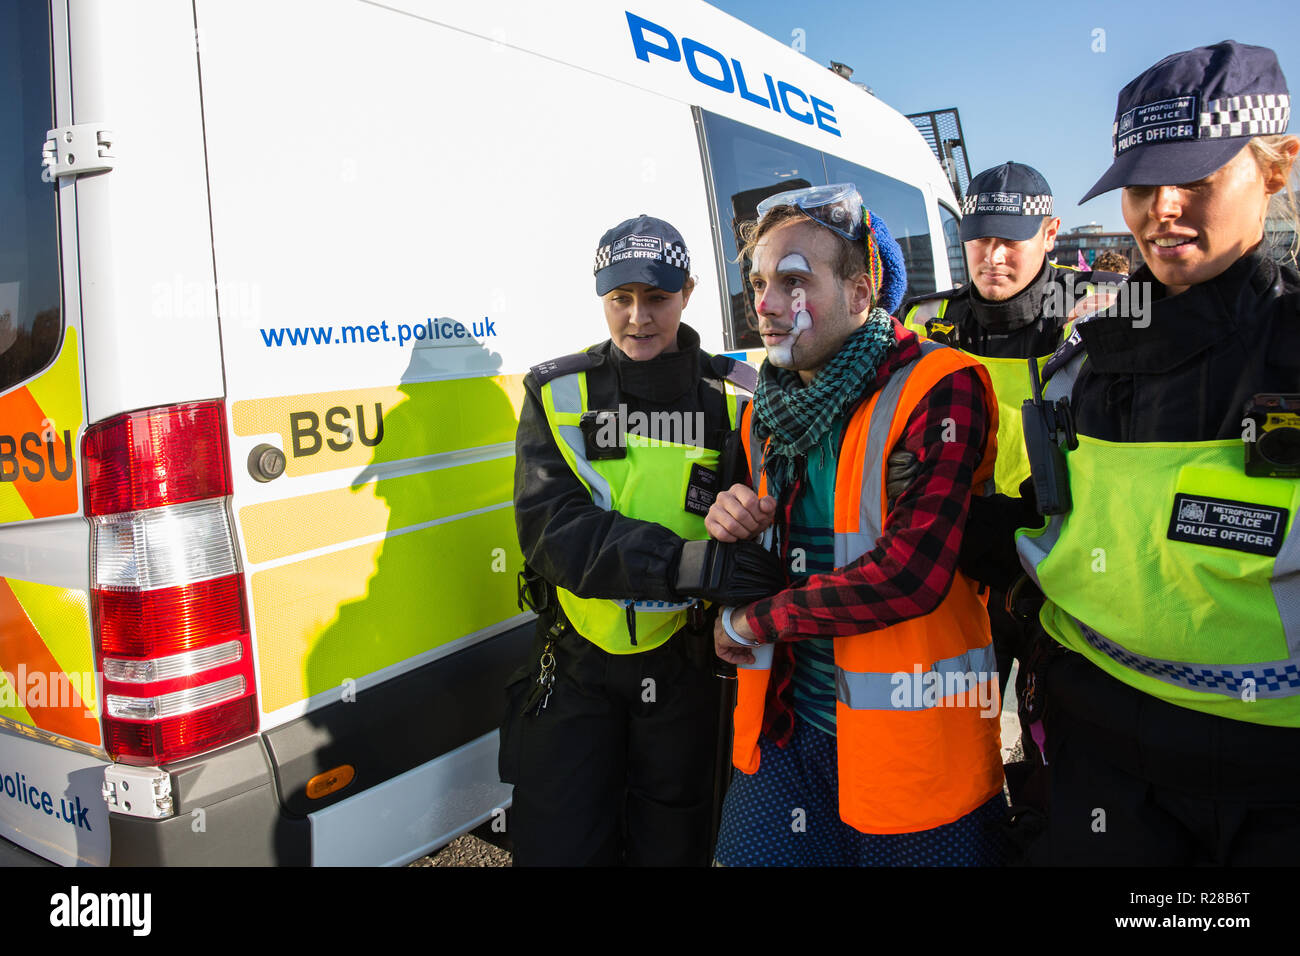 London, UK. 17th November, 2018. Police officers arrest a clown from Clandestine Insurgent Rebel Clown Army (CIRCA) after environmental campaigners from Extinction Rebellion blocked Lambeth Bridge, one of five bridges blocked in central London, as part of a Rebellion Day event to highlight 'criminal inaction in the face of climate change catastrophe and ecological collapse' by the UK Government as part of a programme of civil disobedience during which scores of campaigners have been arrested. Credit: Mark Kerrison/Alamy Live News Stock Photo